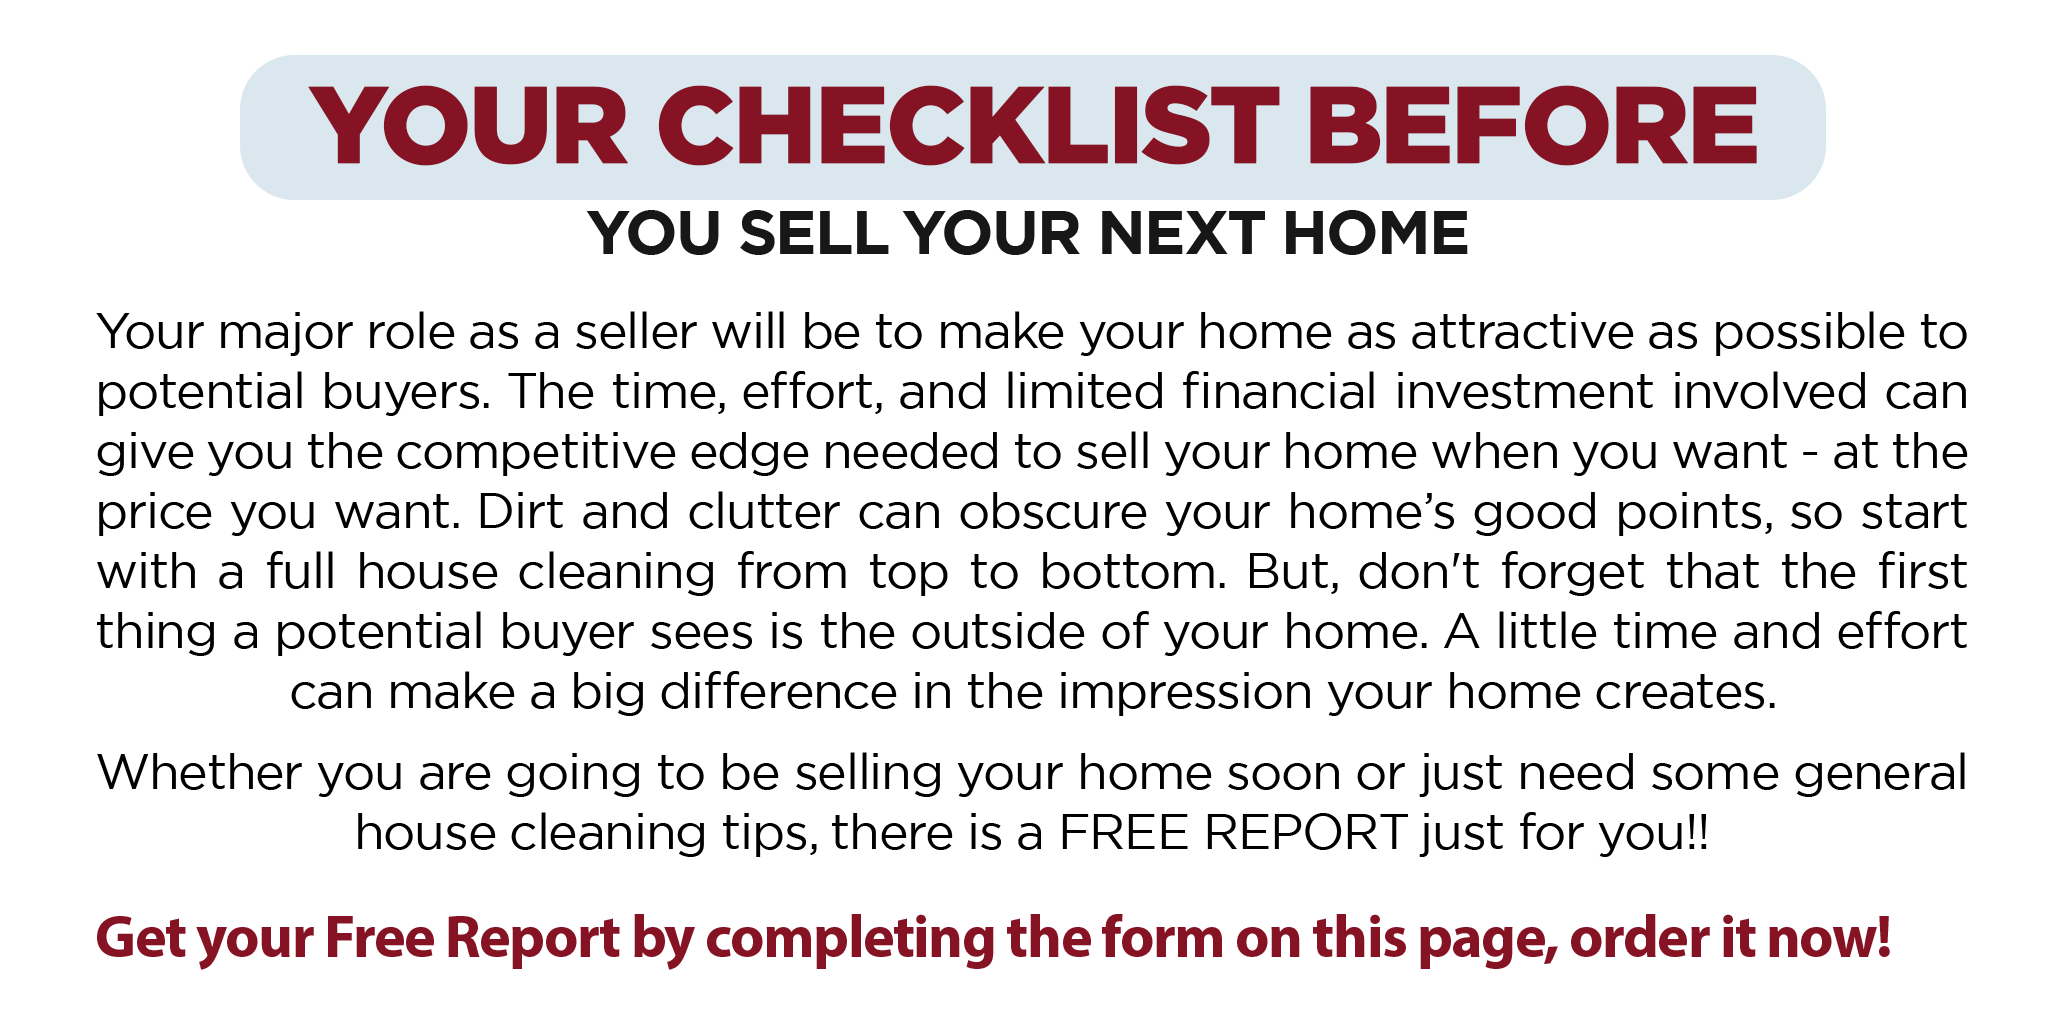 YOUR CHECKLIST BEFORE TEASER.png